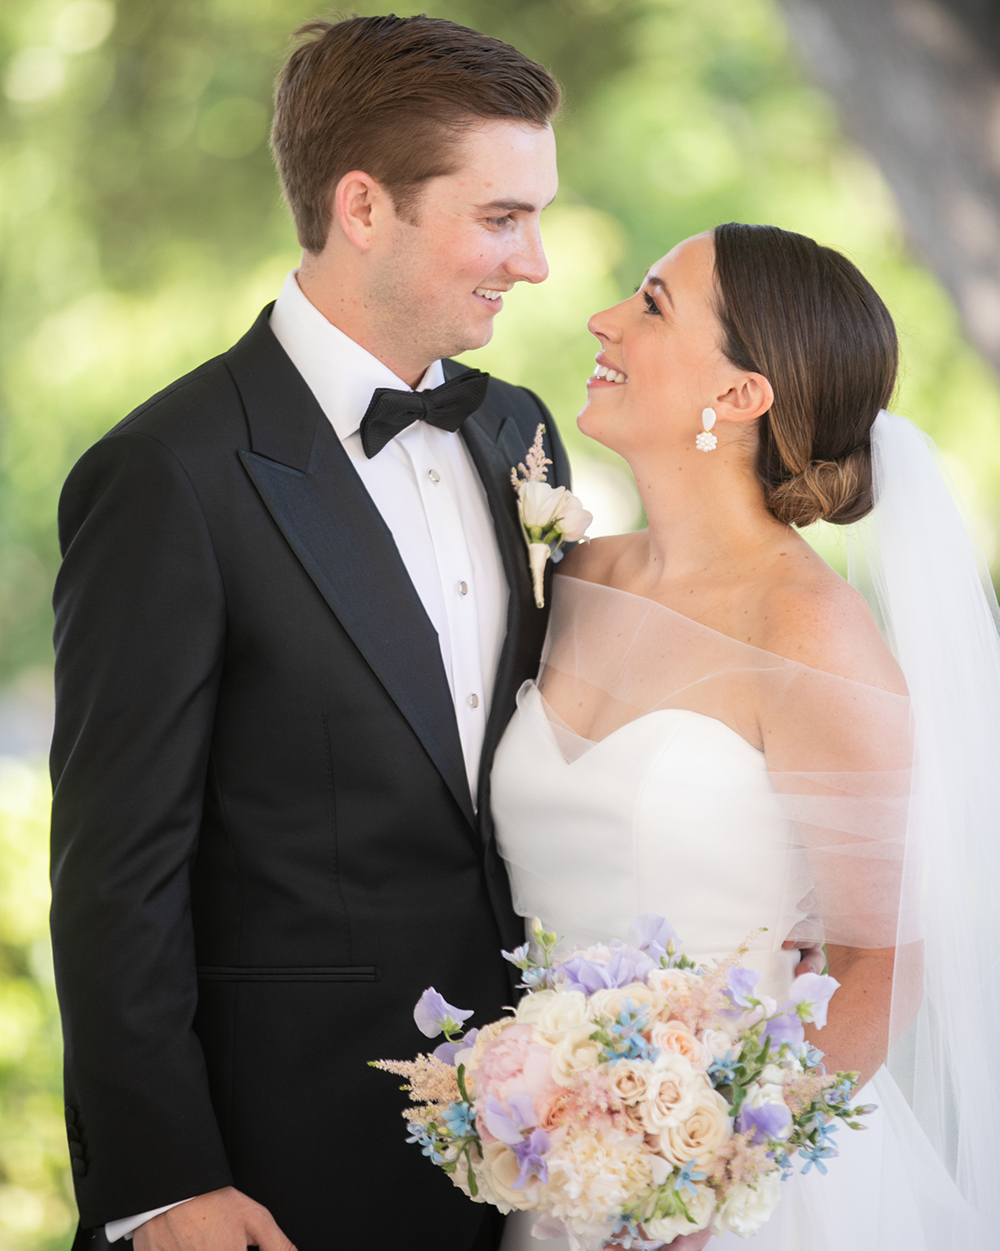 An Intimate Garden Ceremony and Backyard Celebration at Katherine and Colin’s First Home